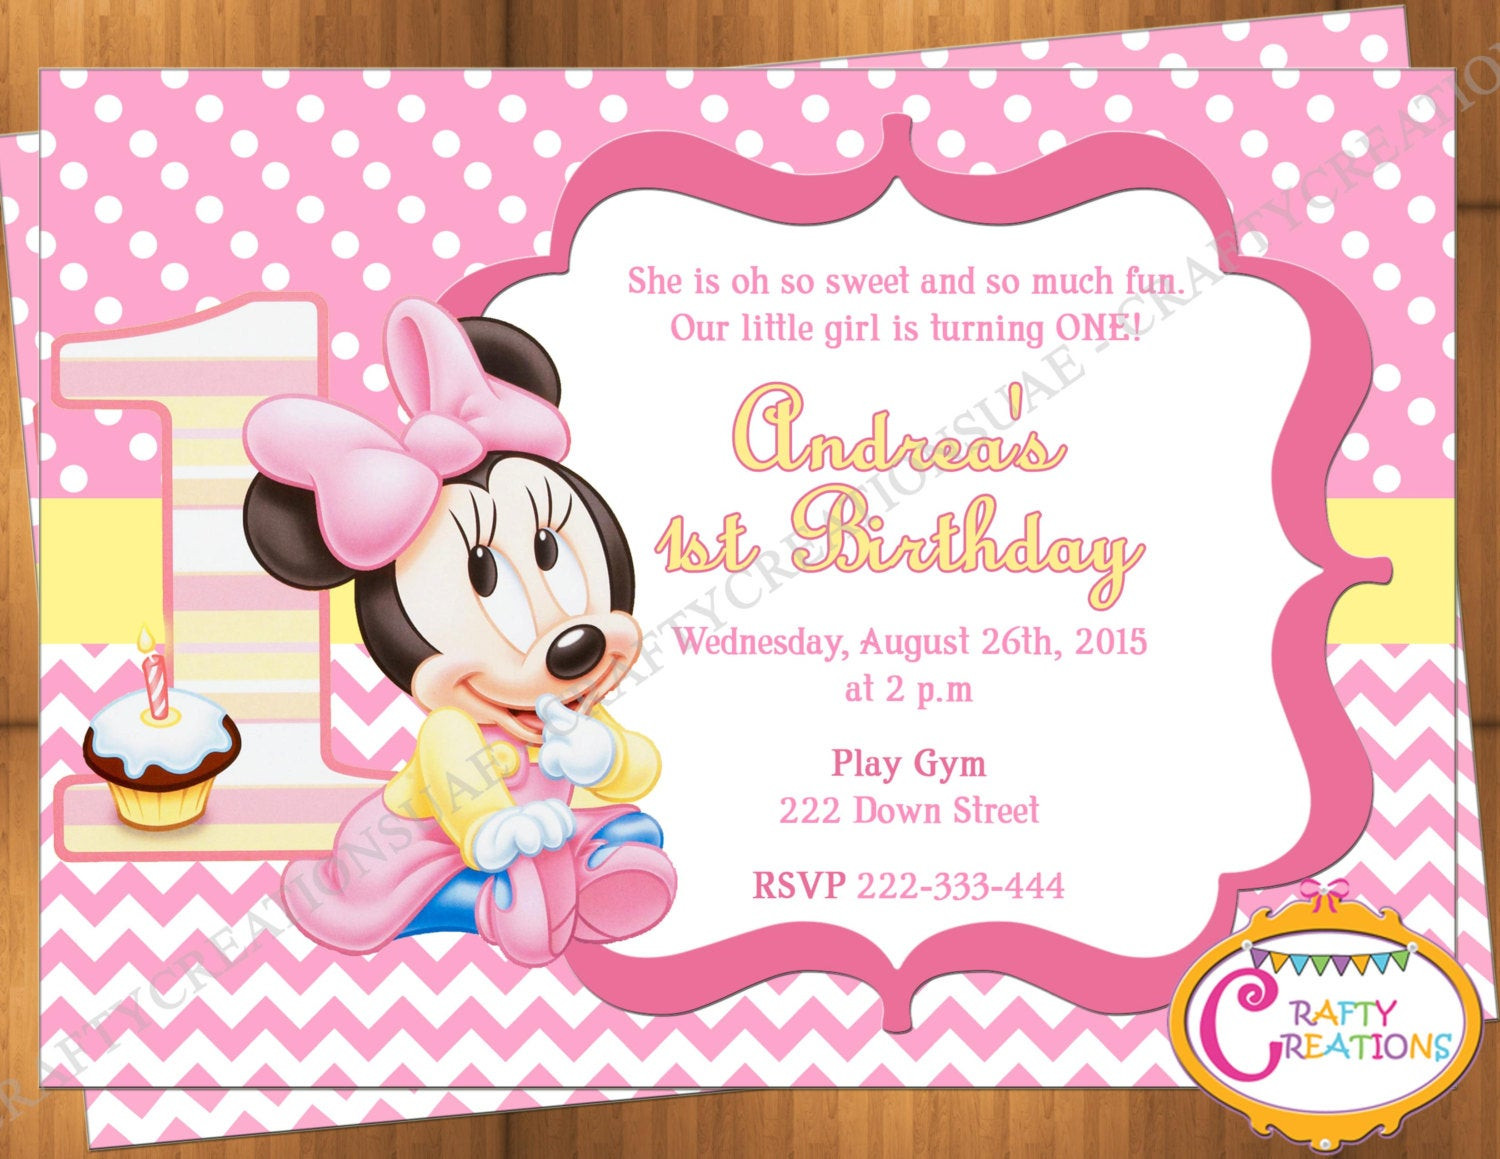 Baby Minnie Mouse 1st Birthday Invitations
 Baby Minnie Mouse First Birthday Invitation Minnie Mouse 1st